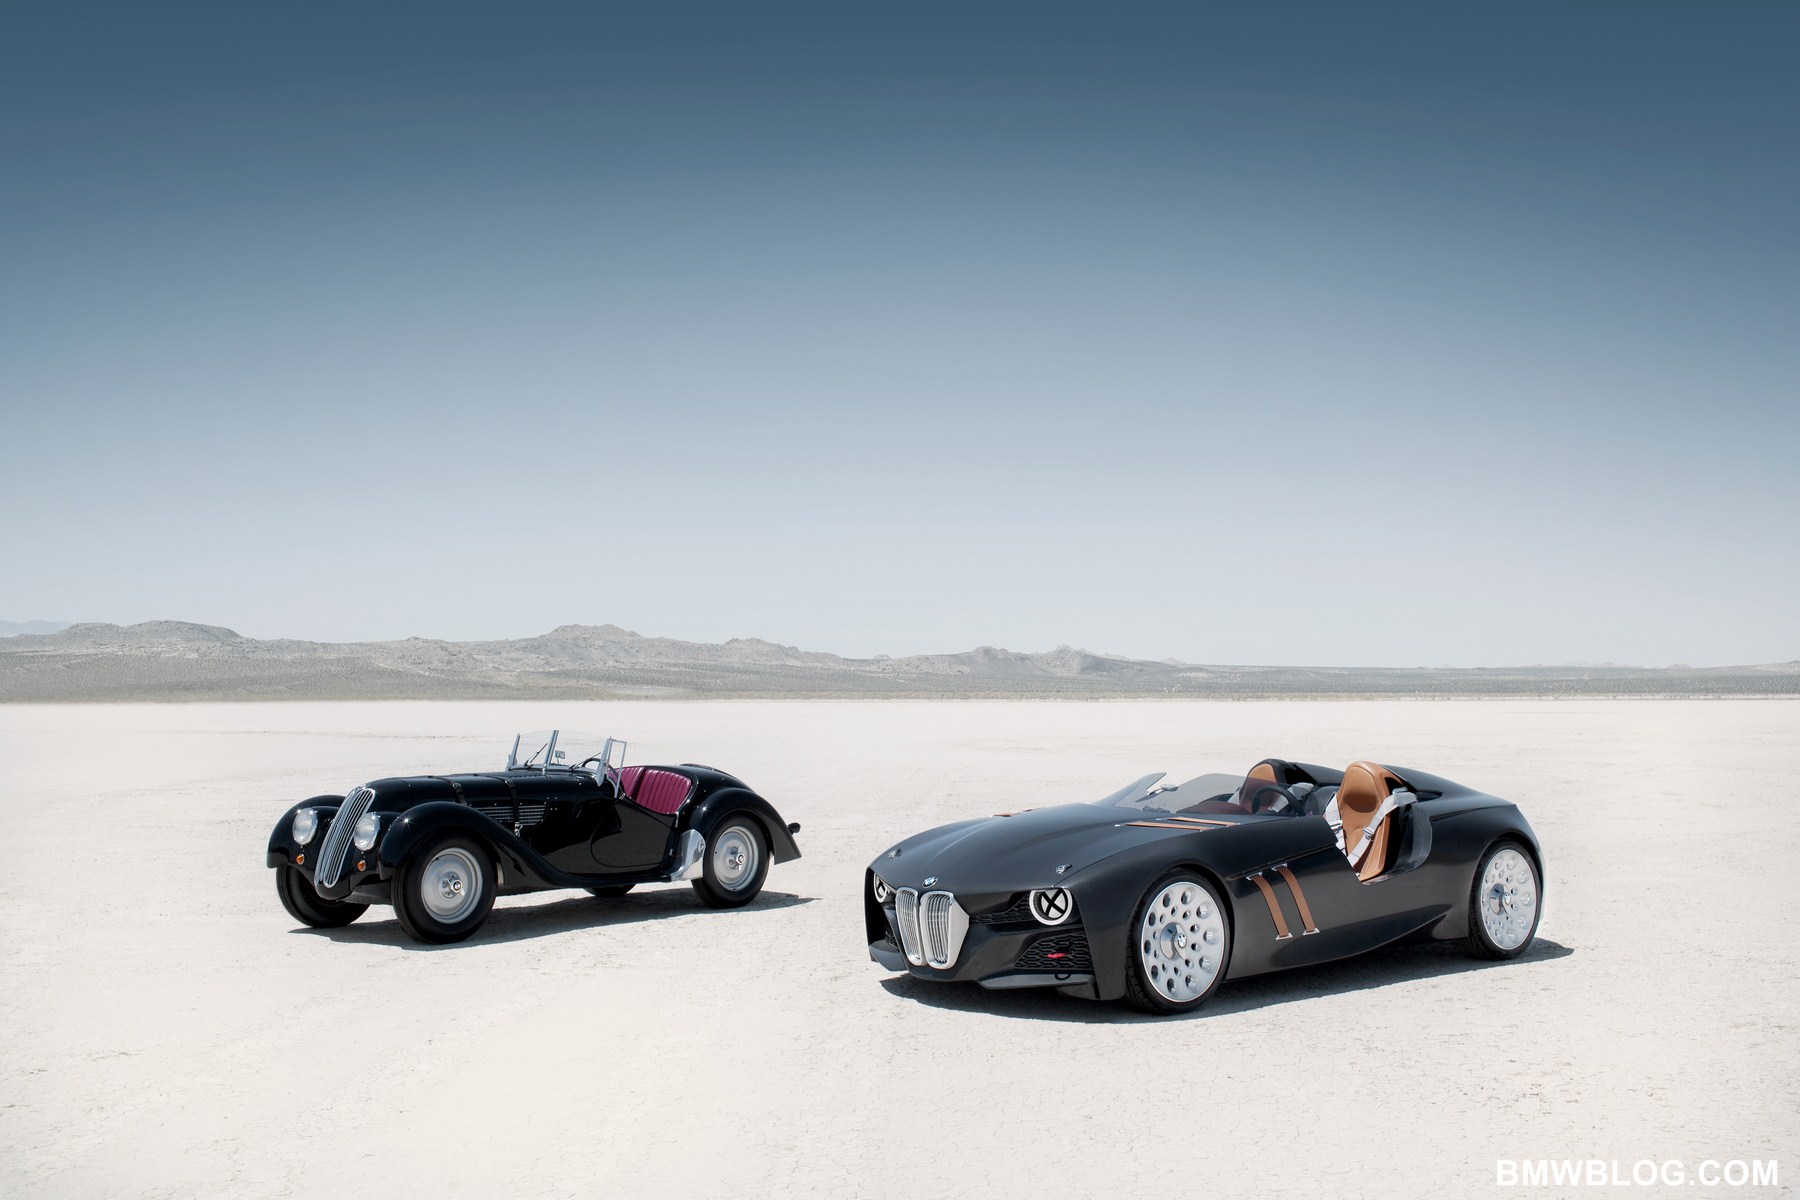 BMW 328 and BMW 328 Hommage